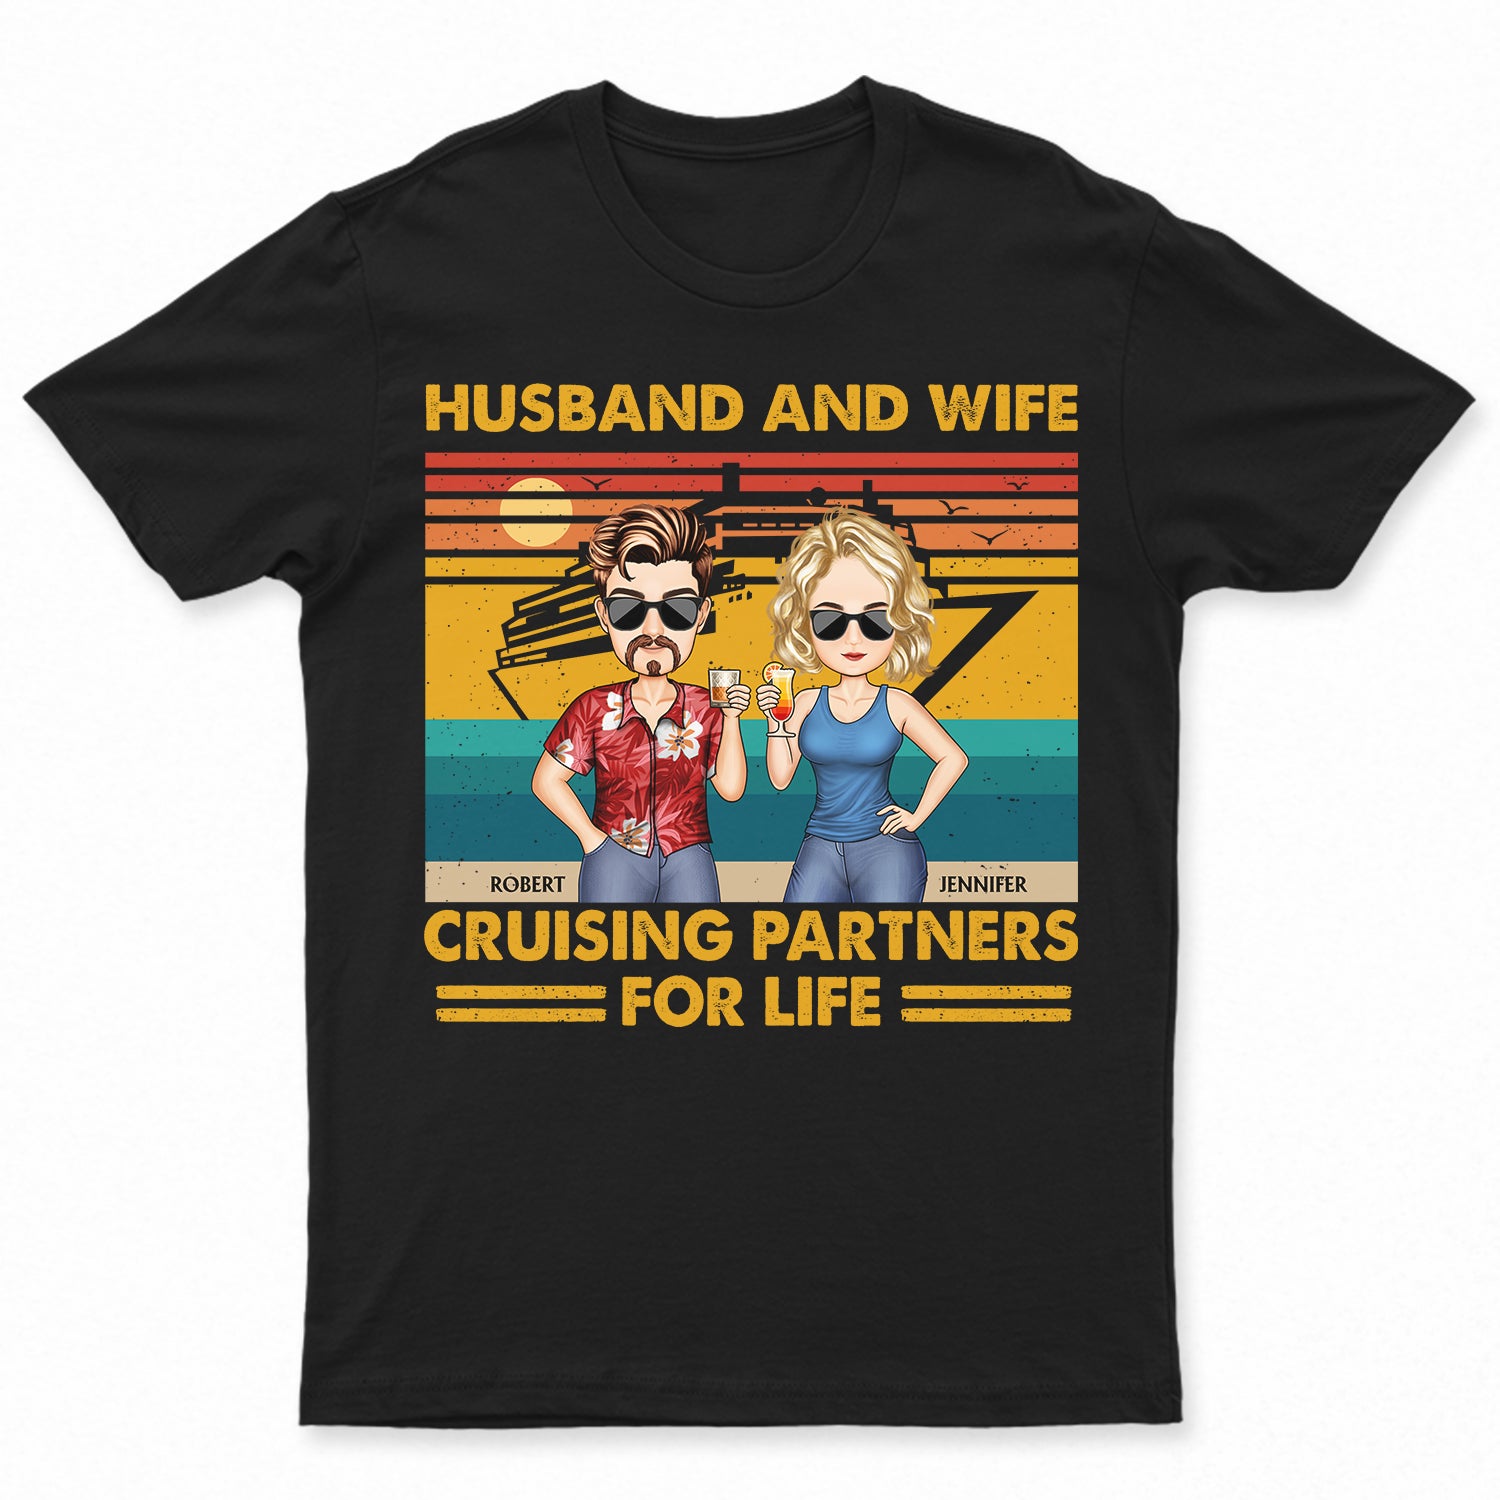 Husband And Wife Cruising Partners For Life Traveling Couples Beach Vacation - Anniversary, Birthday Gift For Spouse, Boyfriend, Girlfriend - Personalized Custom T Shirt